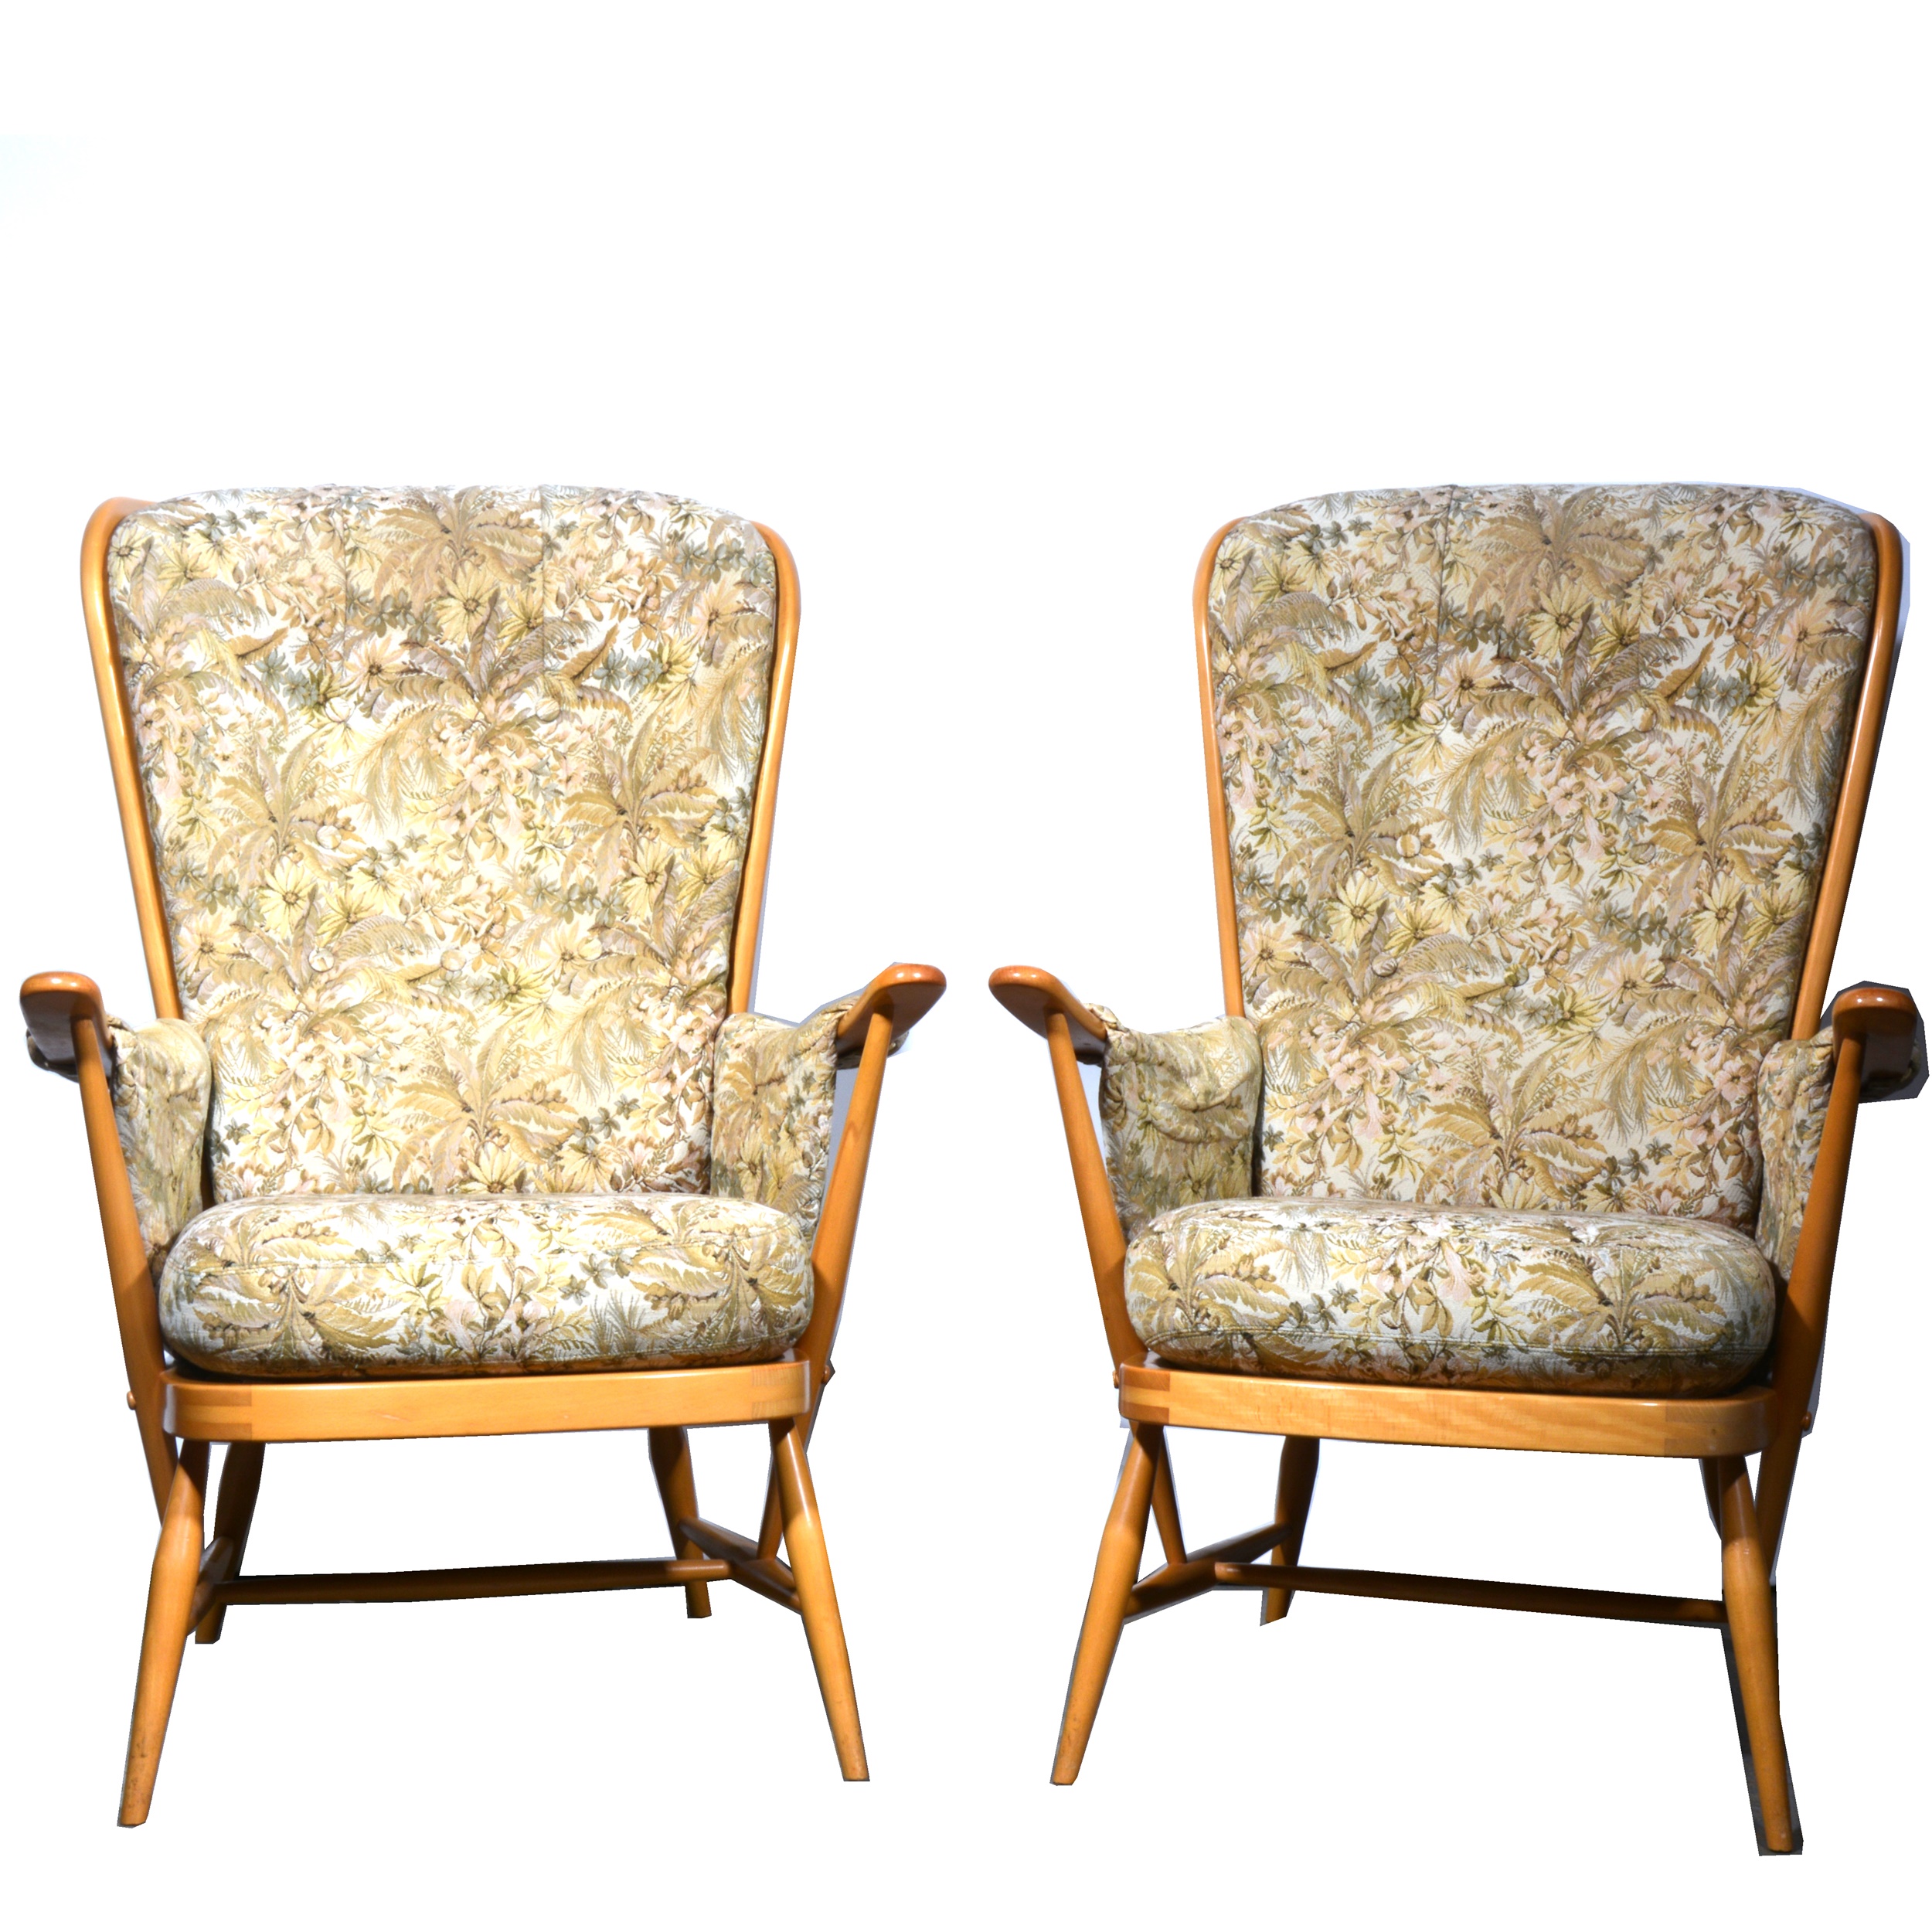 Pair of Ercol Evergreen easy chairs